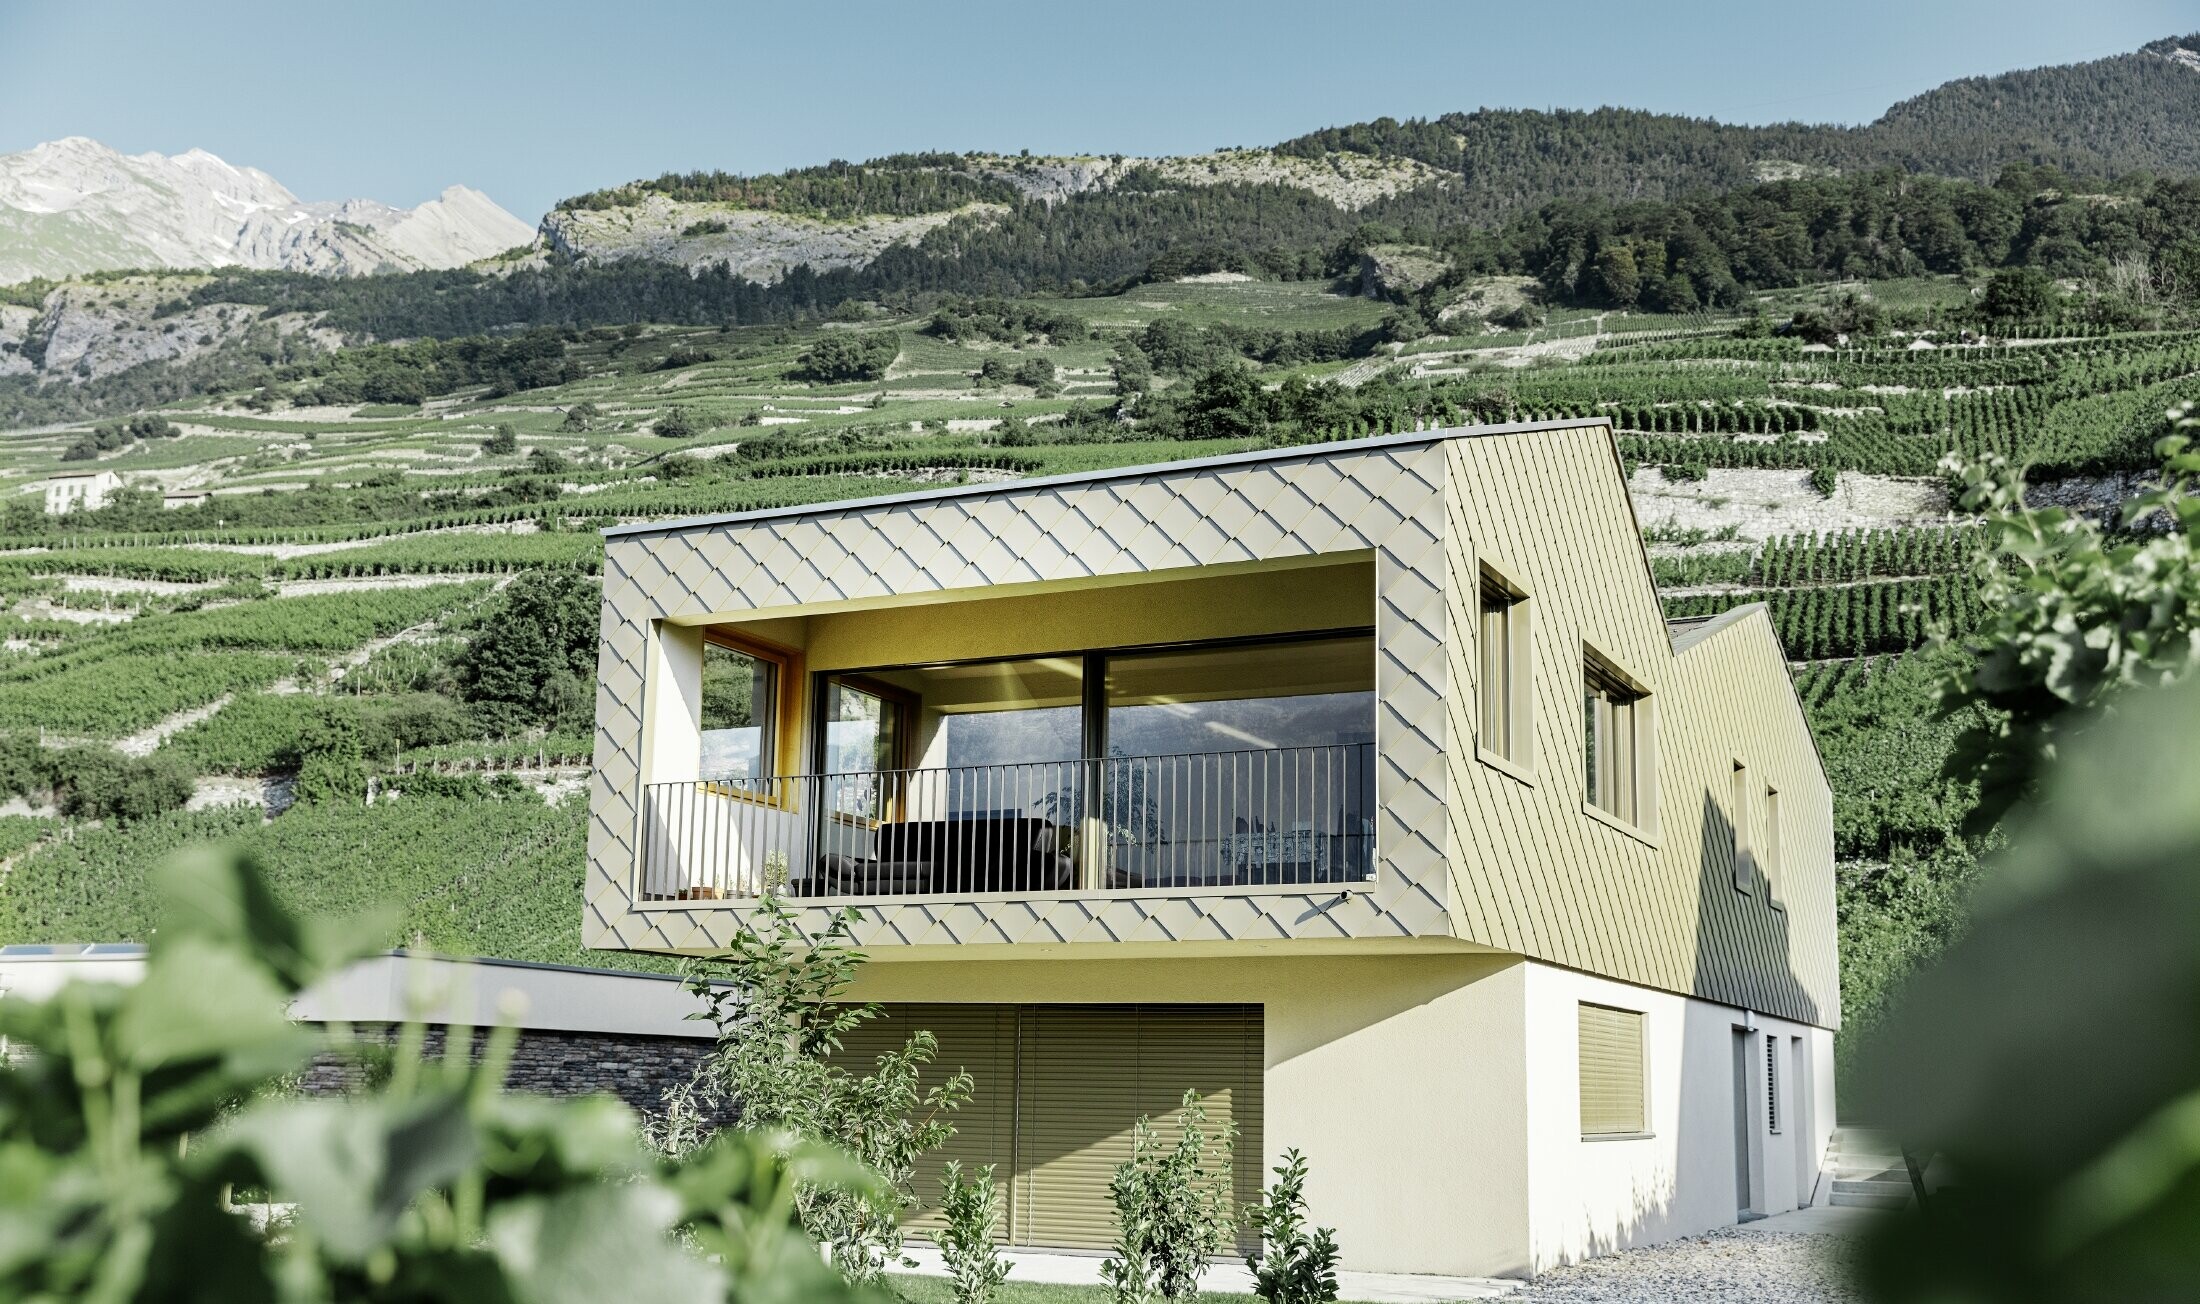 Modern detached house set in the heart of the Rhone valley vineyards with four different roof surfaces and an open gallery clad with rhomboid façade tiles in bronze